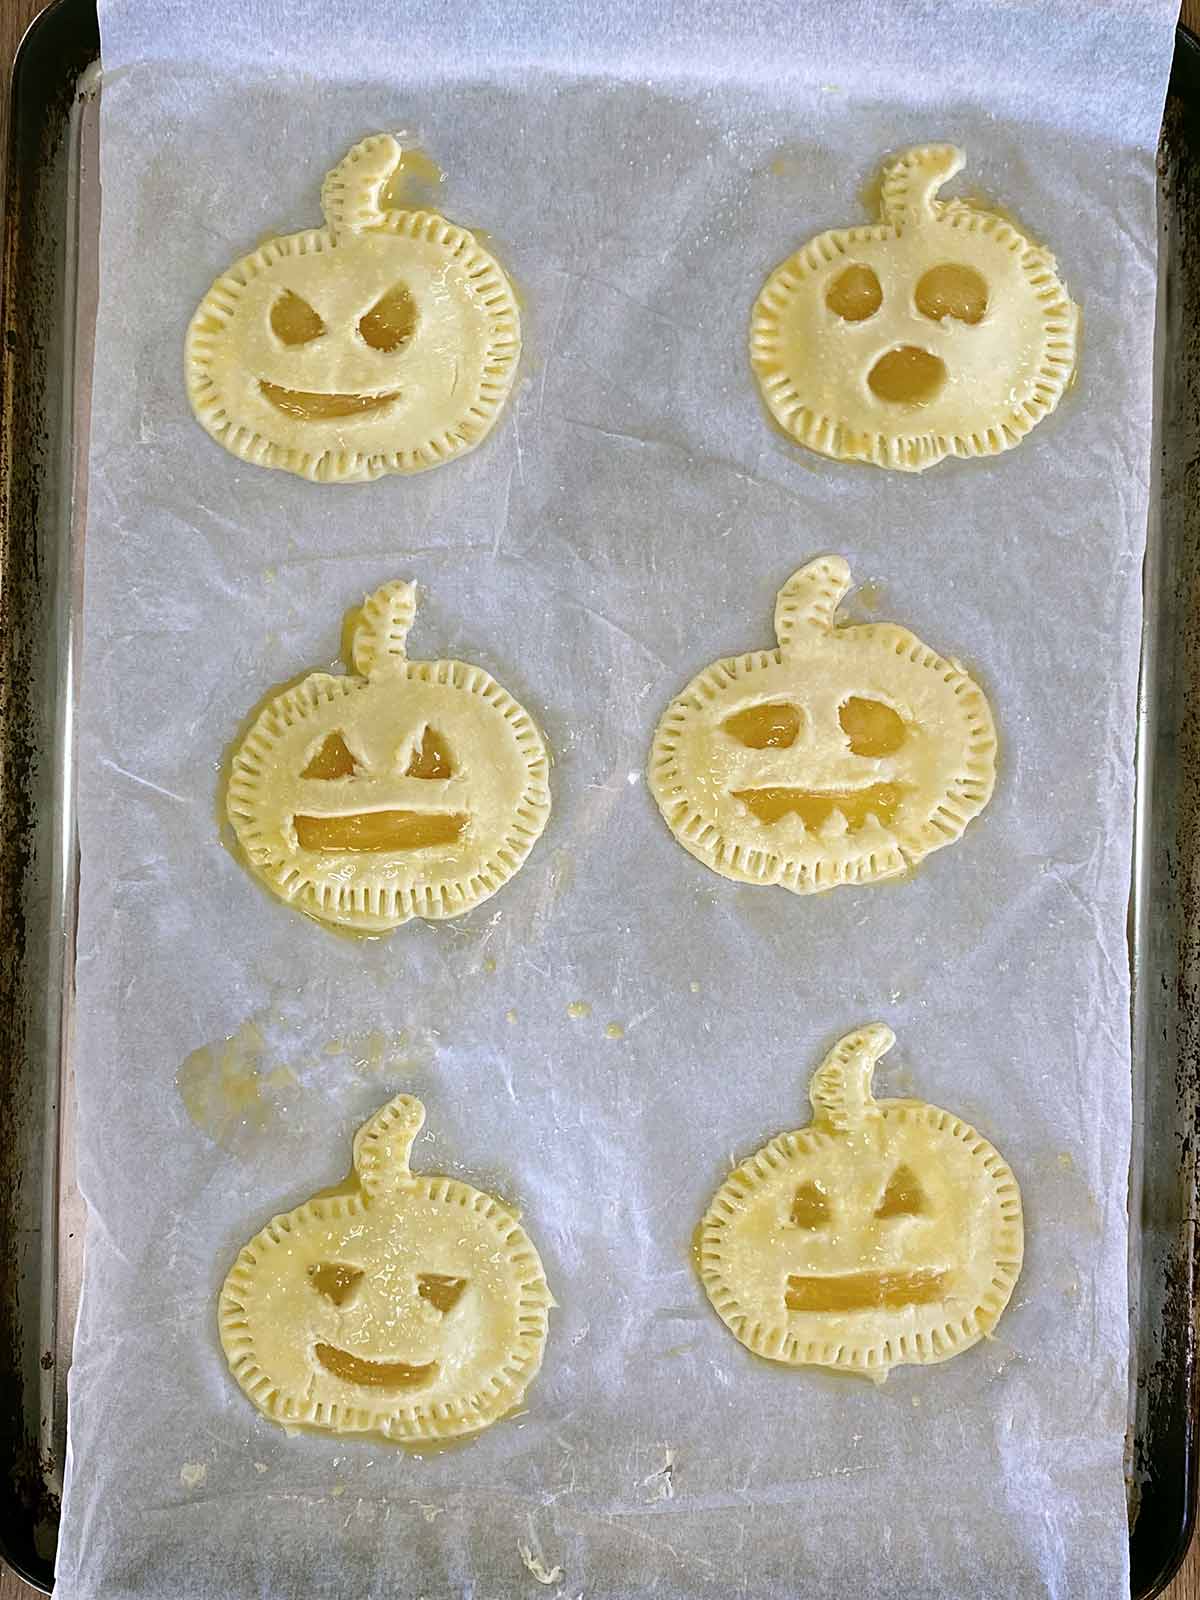 Six uncooked Halloween pies on a baking sheet.